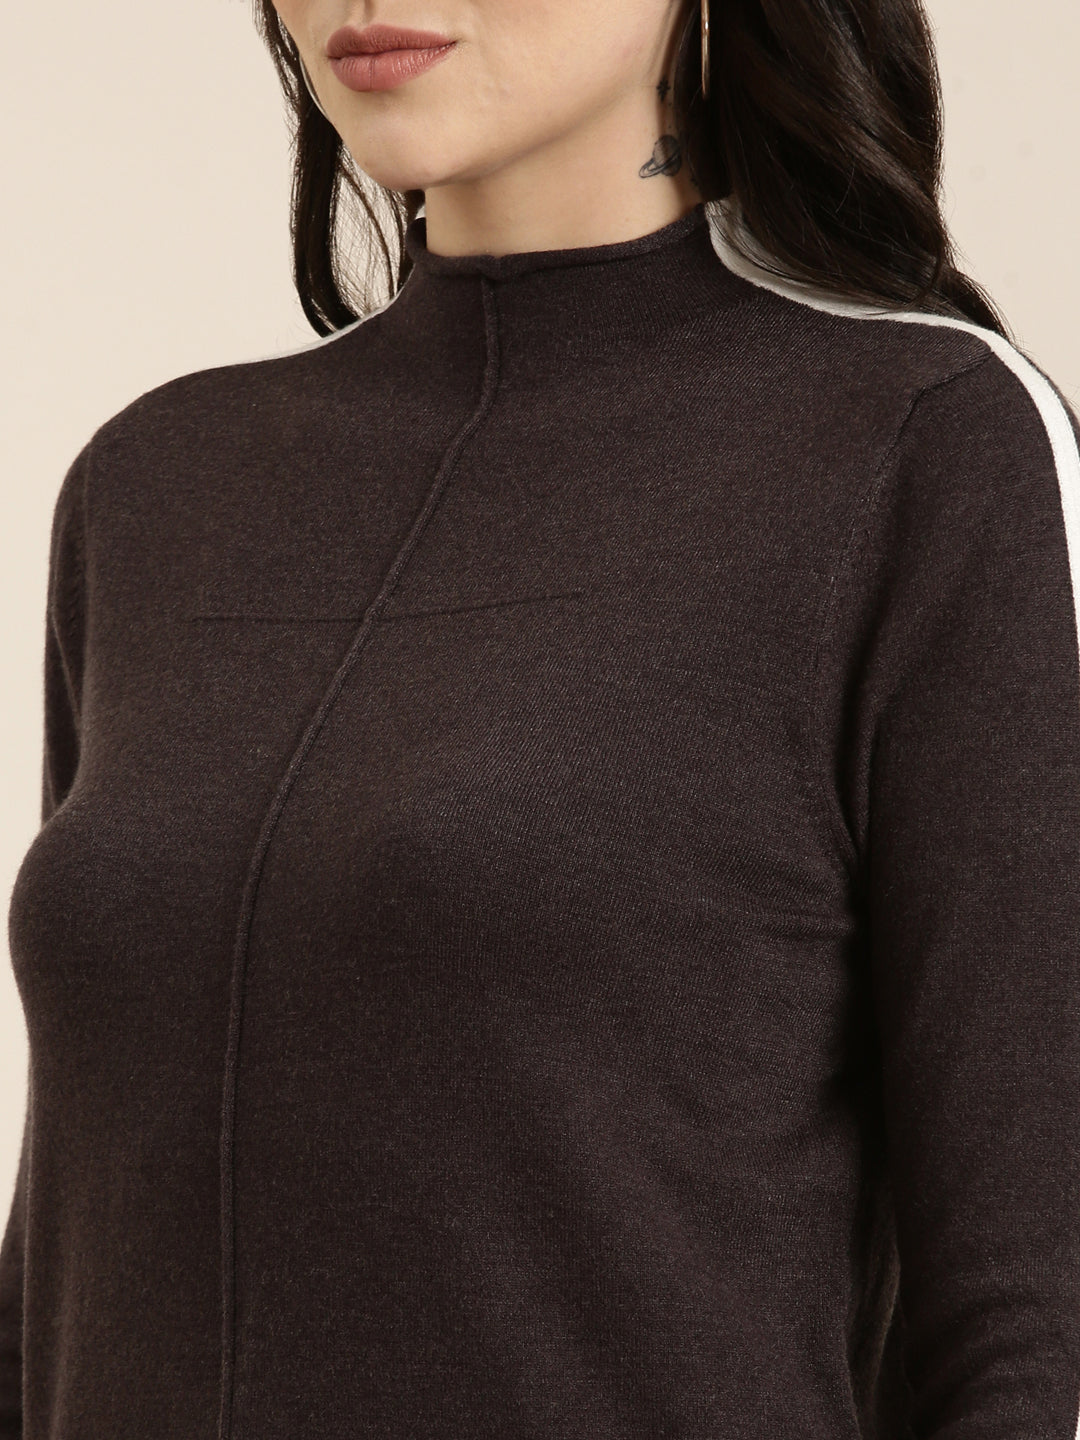 High Neck Solid Regular Sleeves Fitted Grey Top